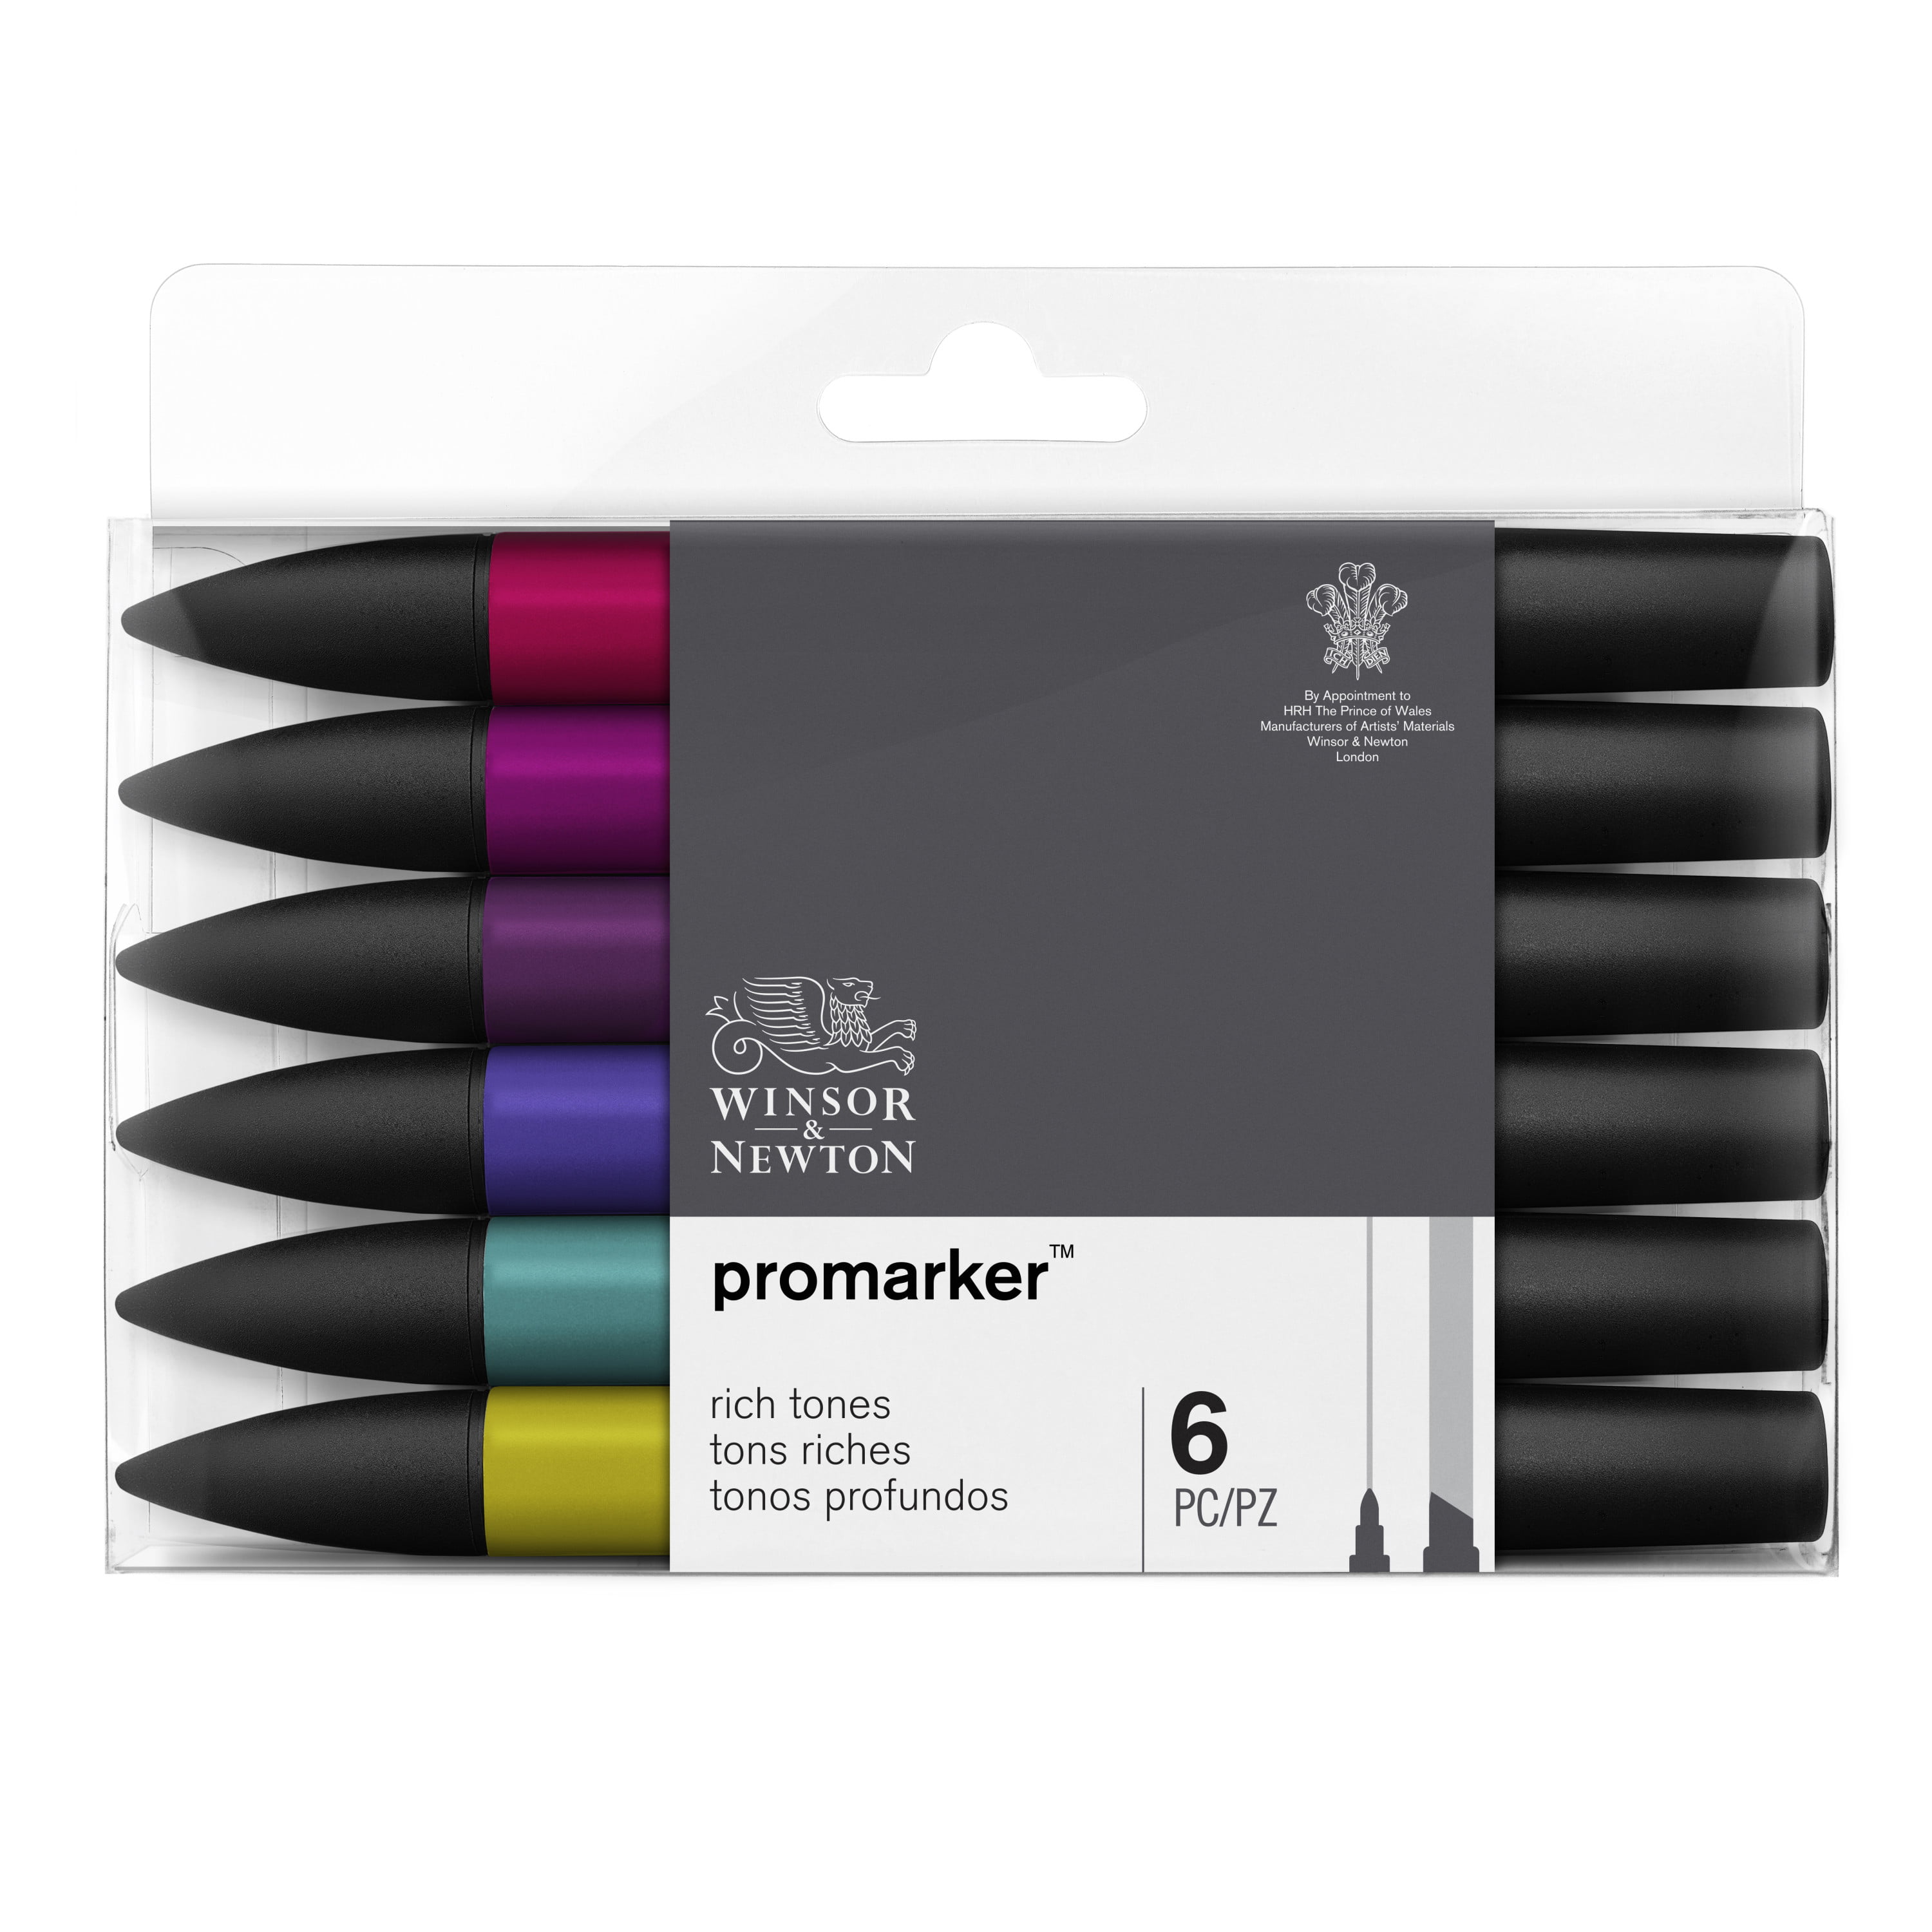 Wet Erase Markers | Bright Colors for Writing Safely on Glass Windows,  Plastic Containers, and Transparent Overlays